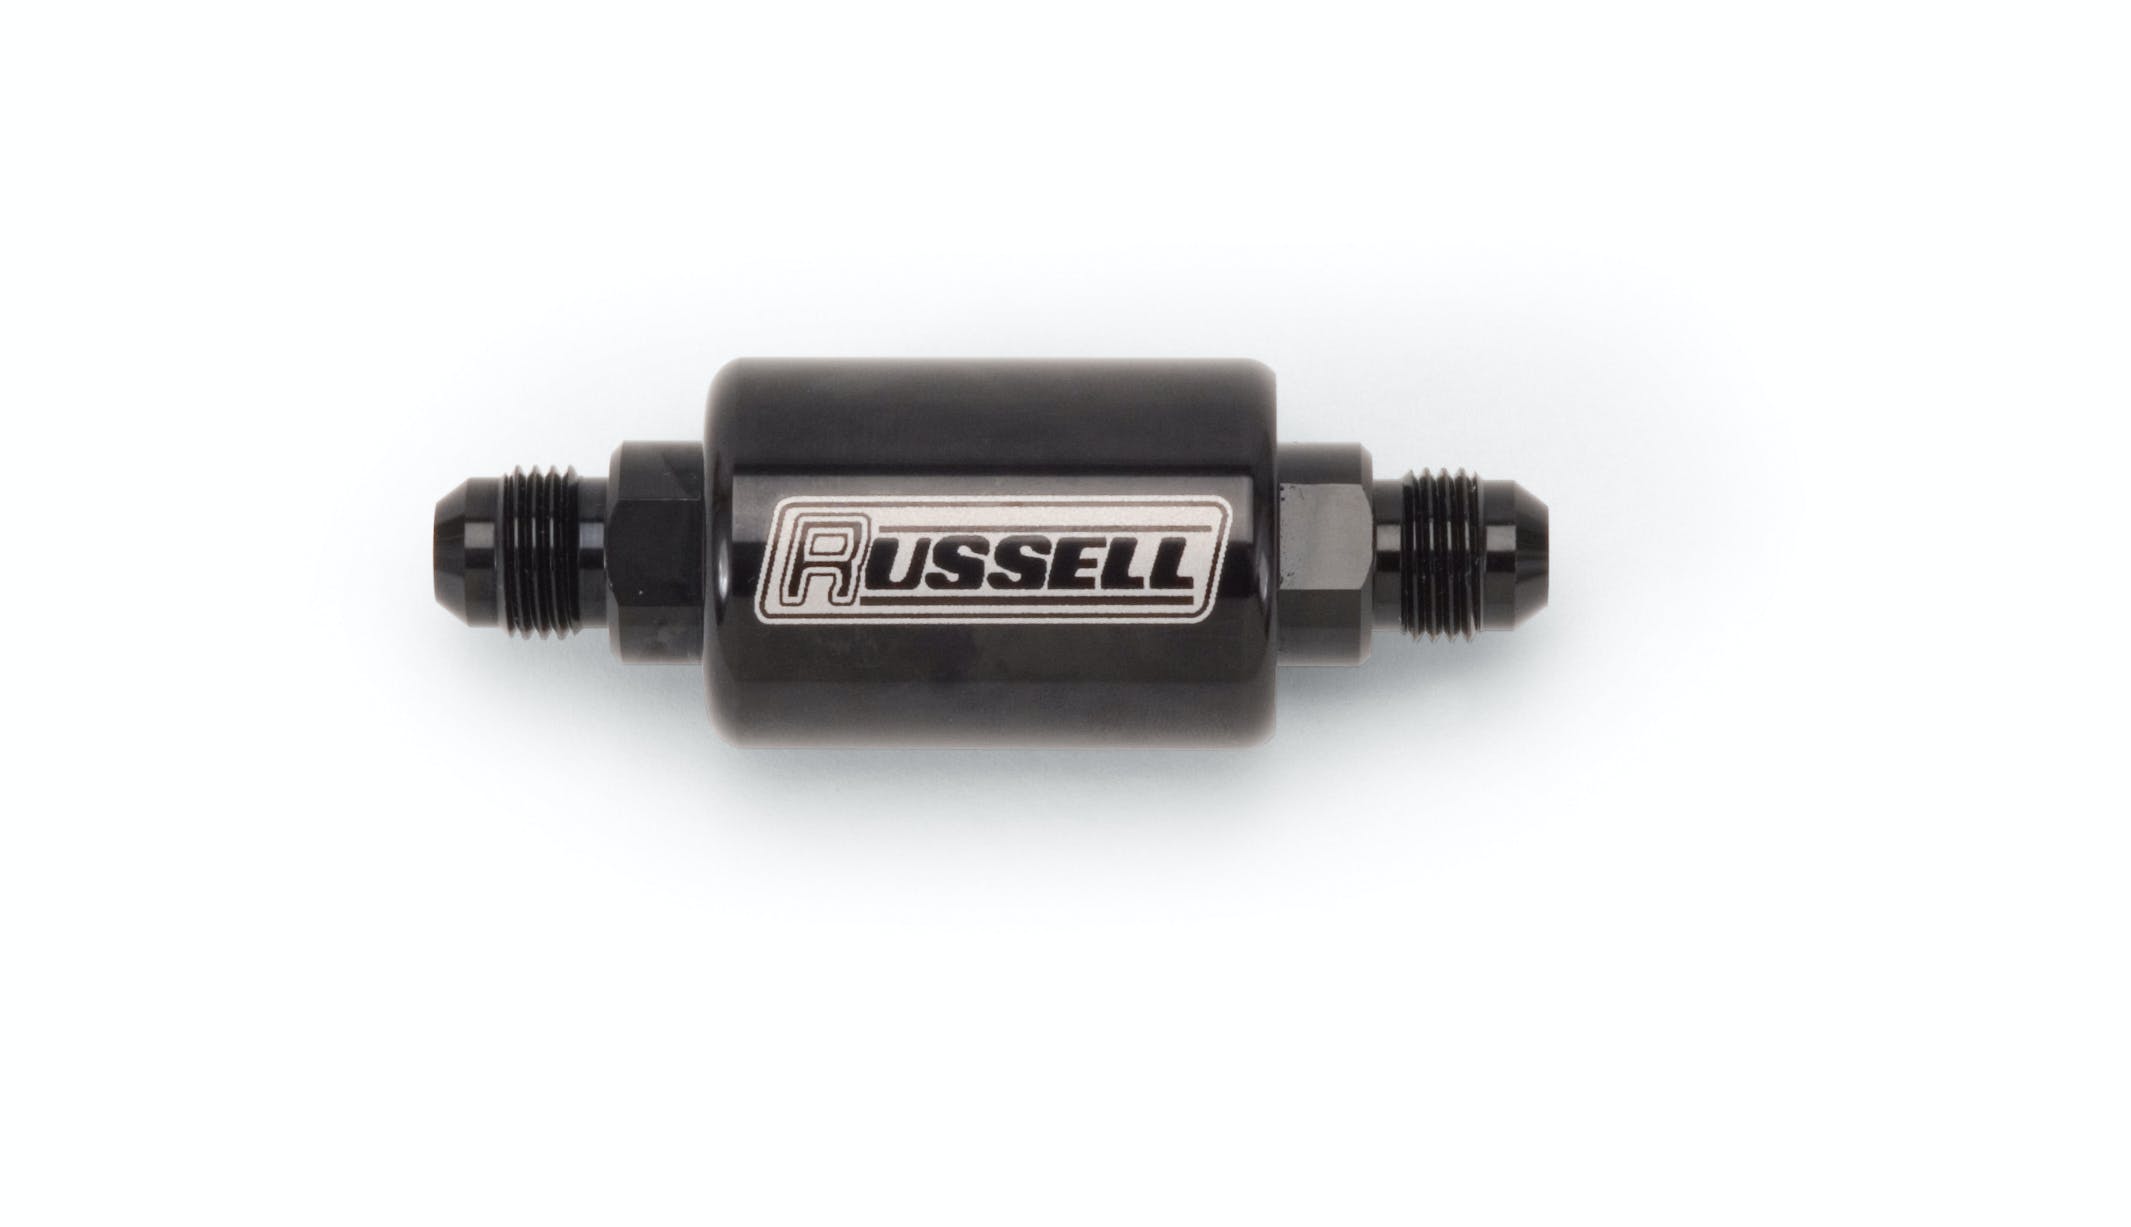 Russell 650603 Check Valve 6AN ML to 6AN ML Blk Anodized